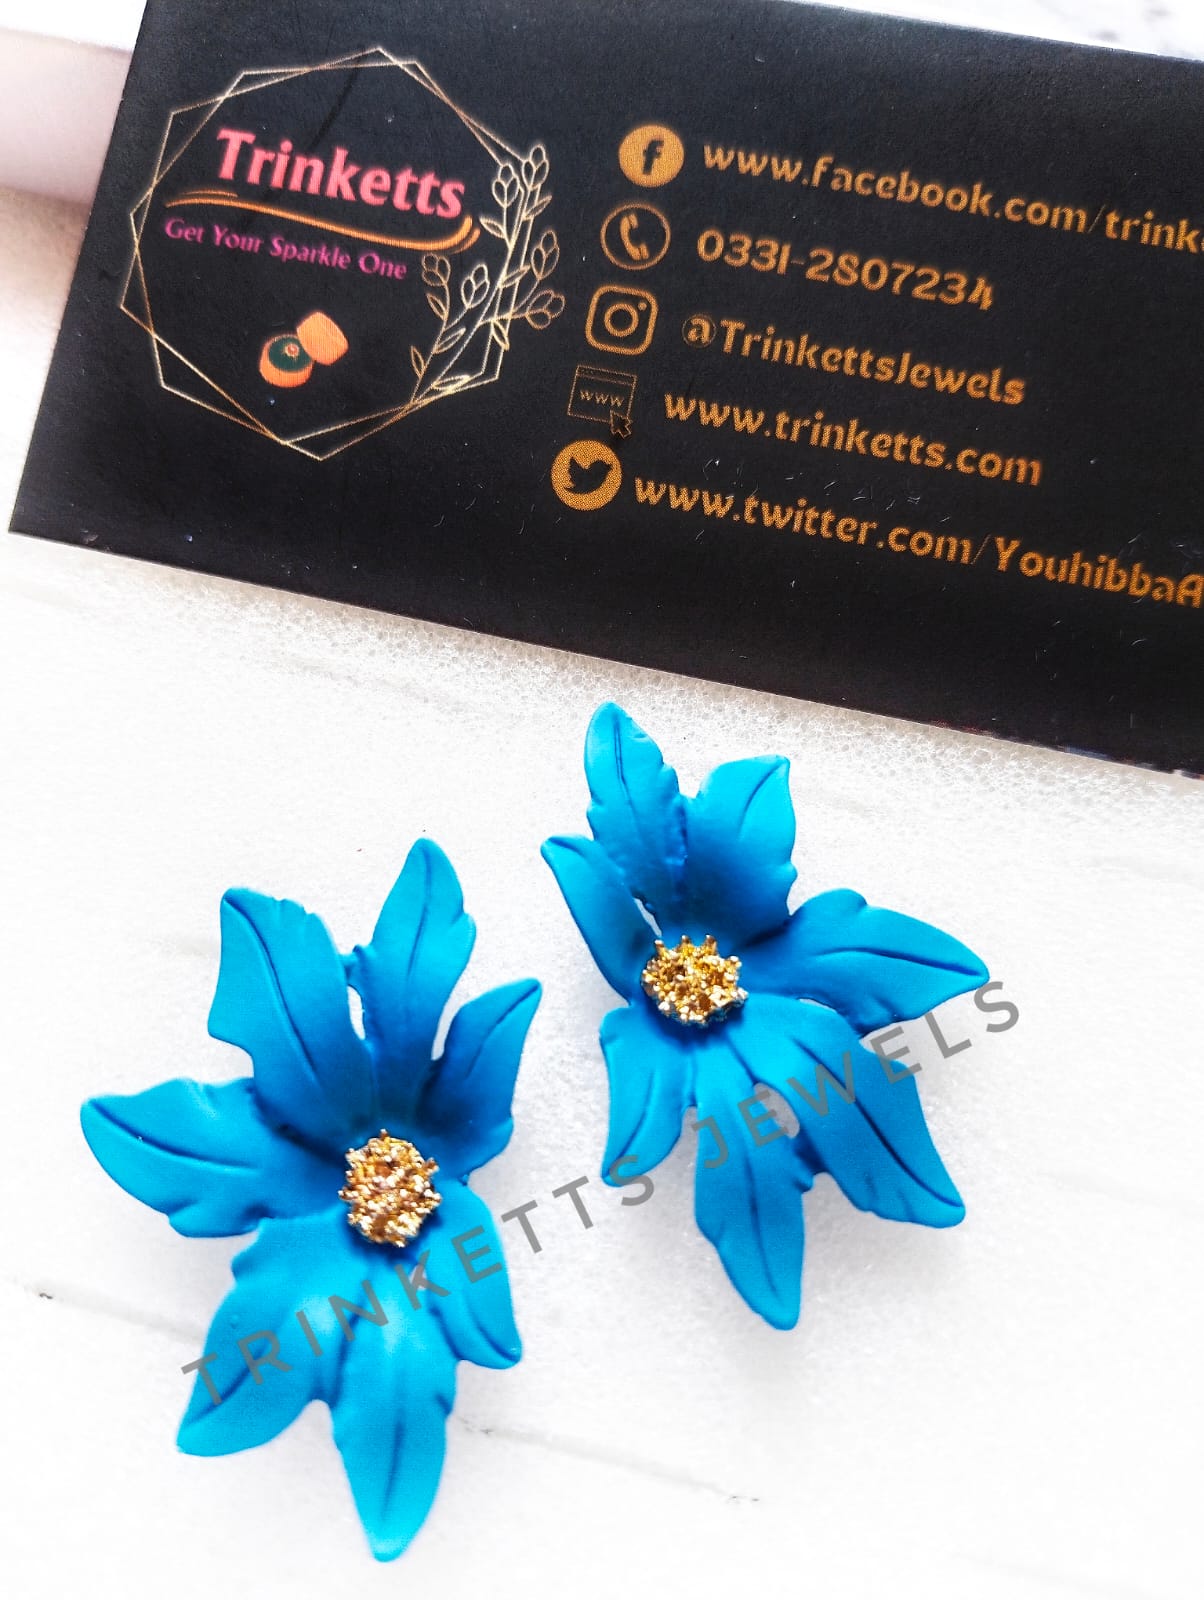 Handcrafted sky blue clay floral studs with leafy petals and a center rhinestone in copper. Artisanal jewelry, blending nature-inspired design with the warmth of clay craftsmanship.